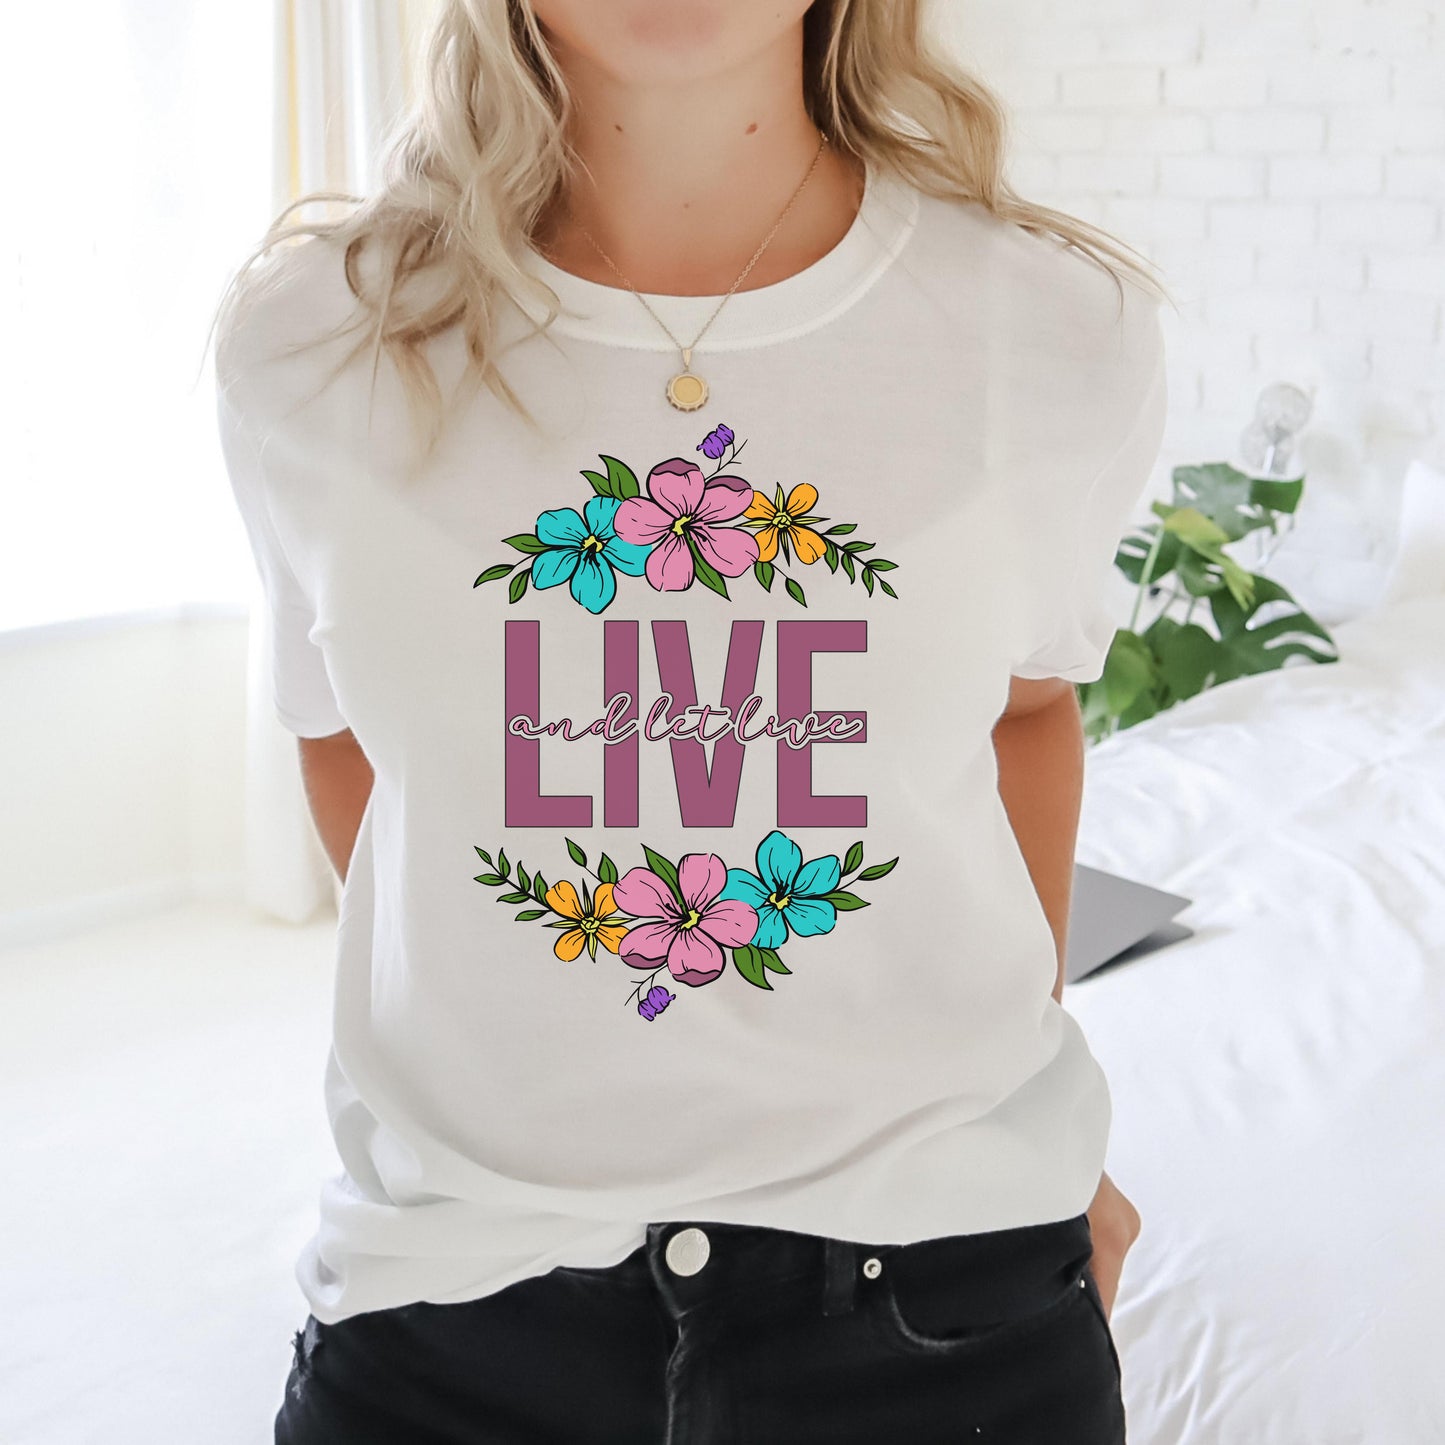 'Live and Let Live' Cute Inspiring Women's T-shirt